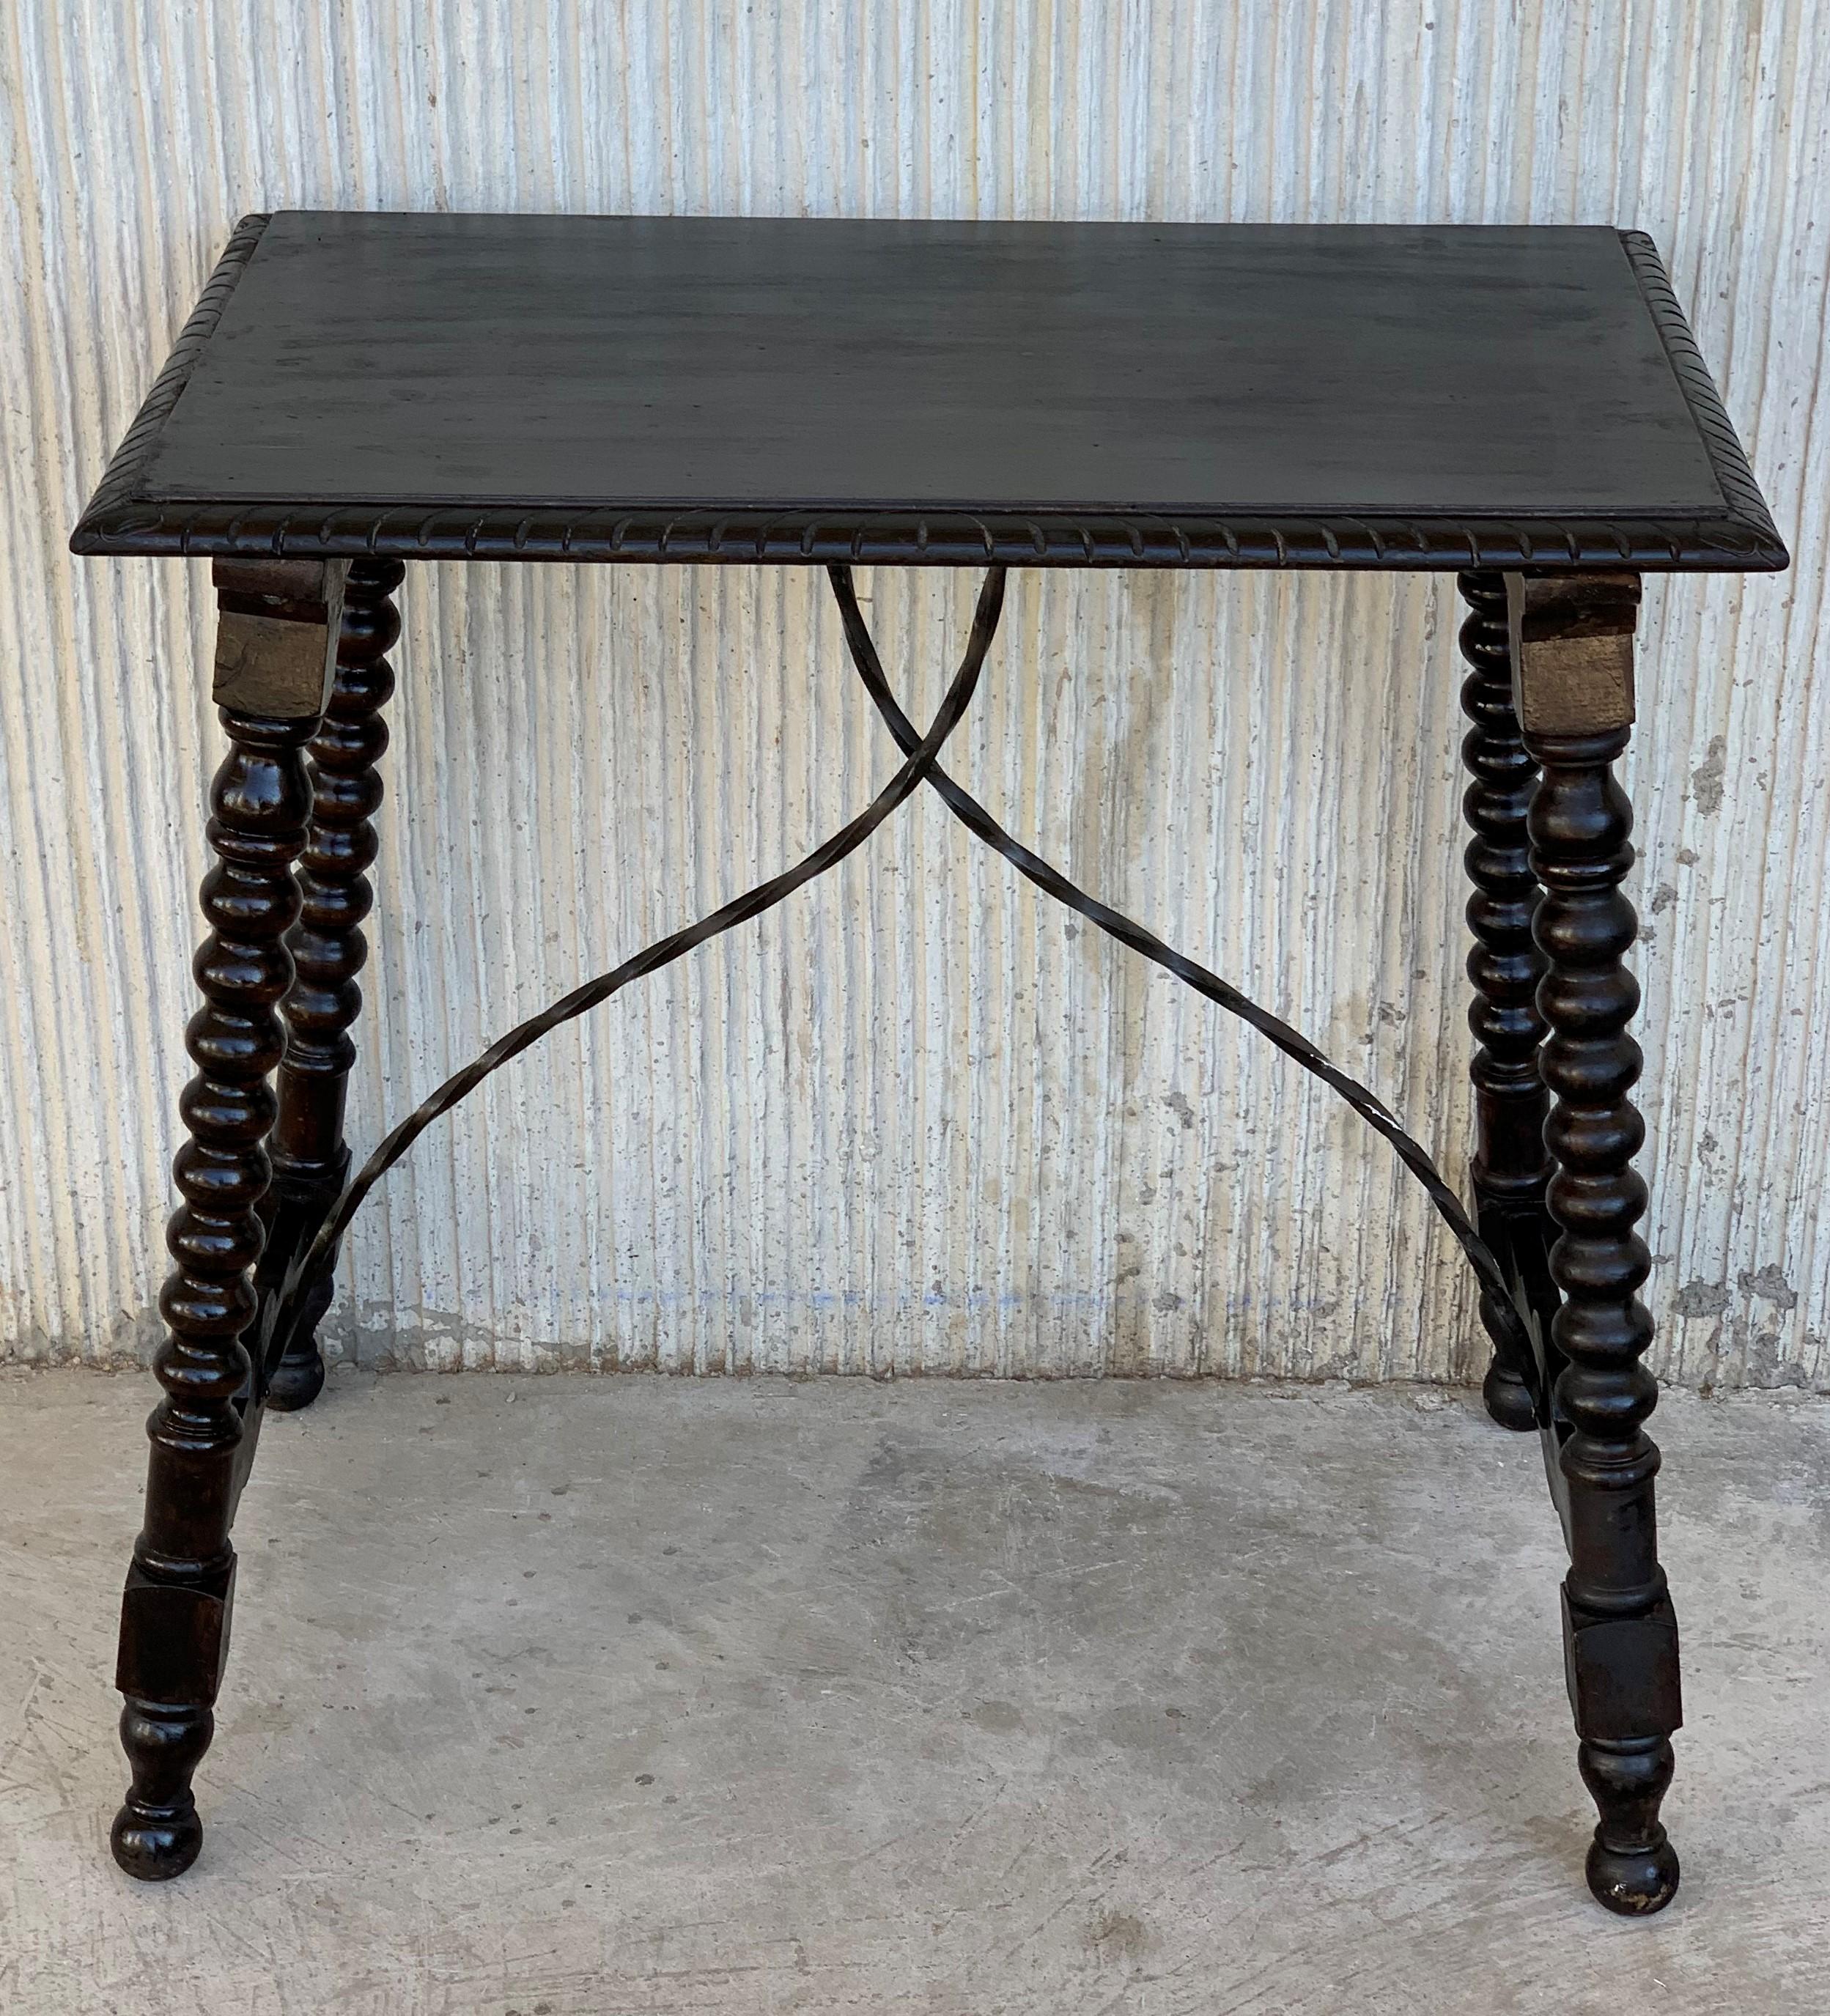 20th Century Spanish Baroque Side Table with Iron Stretcher and Carved Top in Walnut